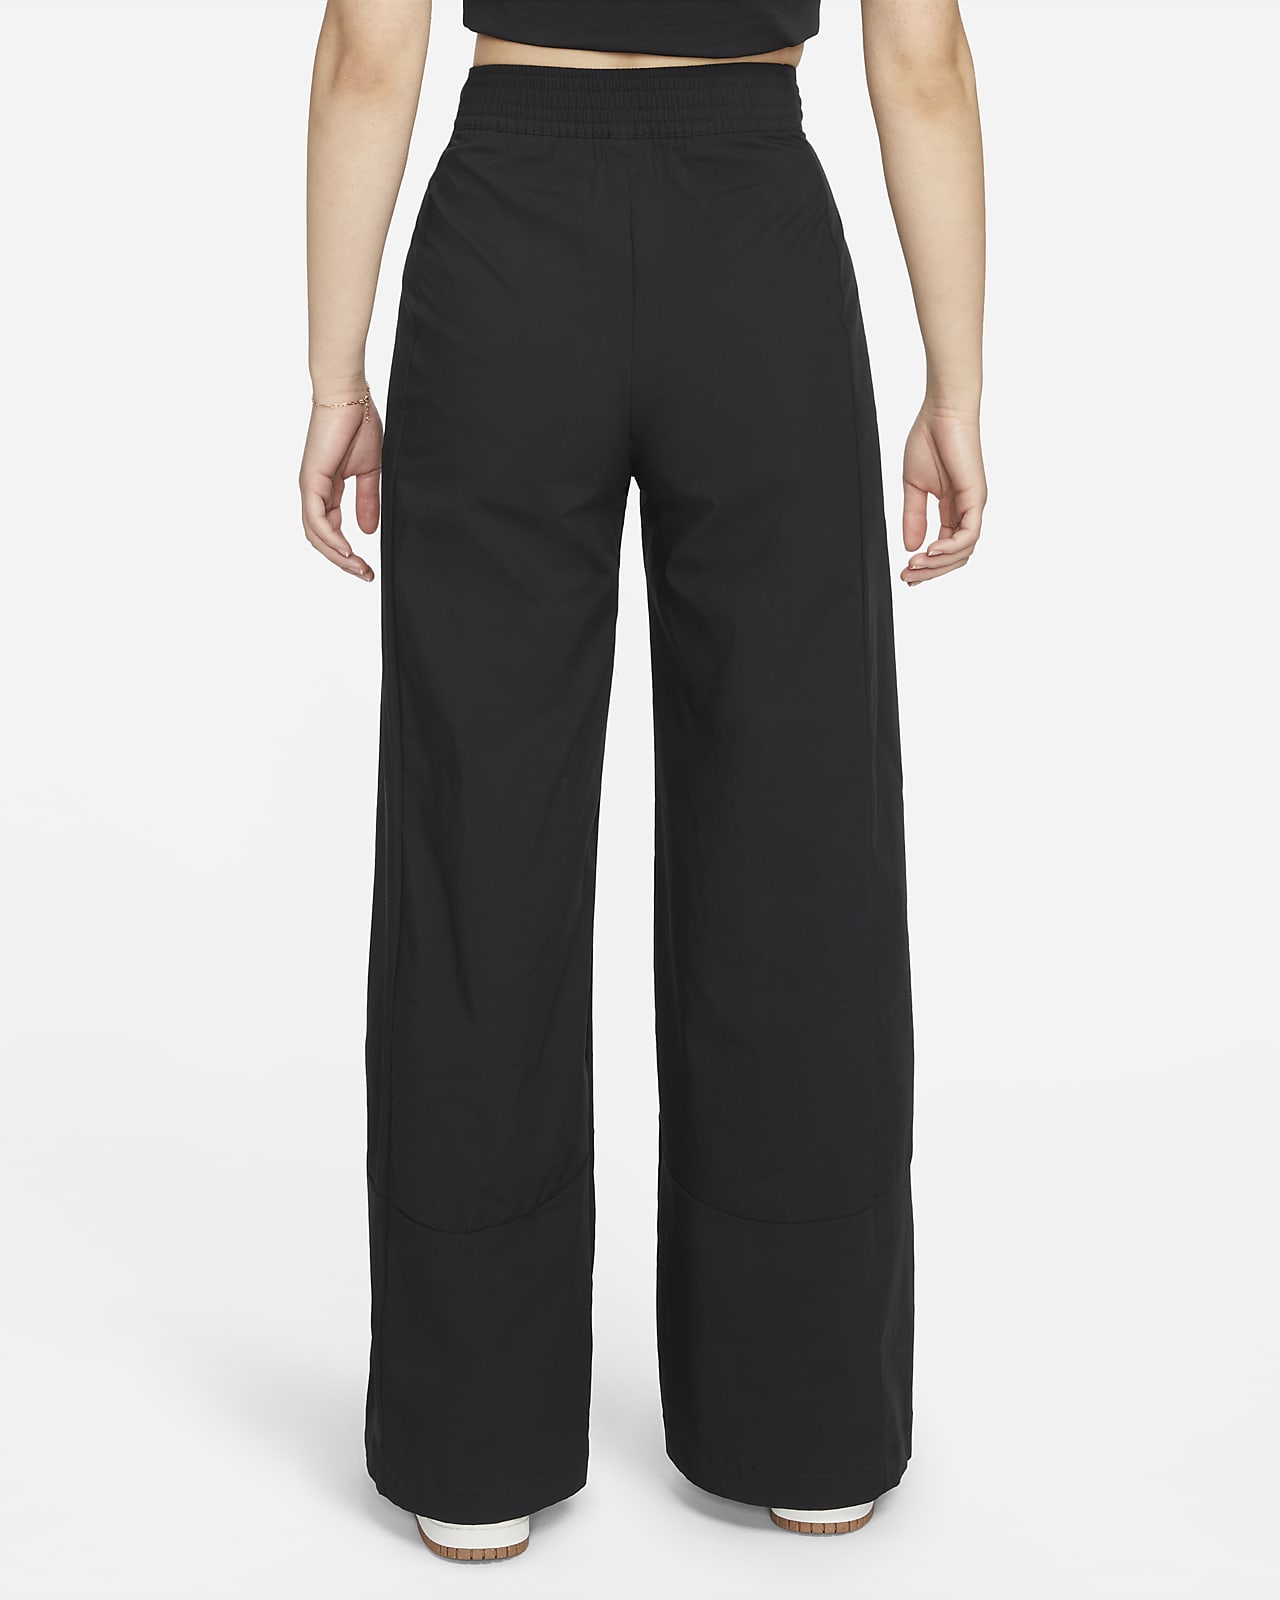 Y.A.S high waisted wide leg plisse trousers in black | ASOS